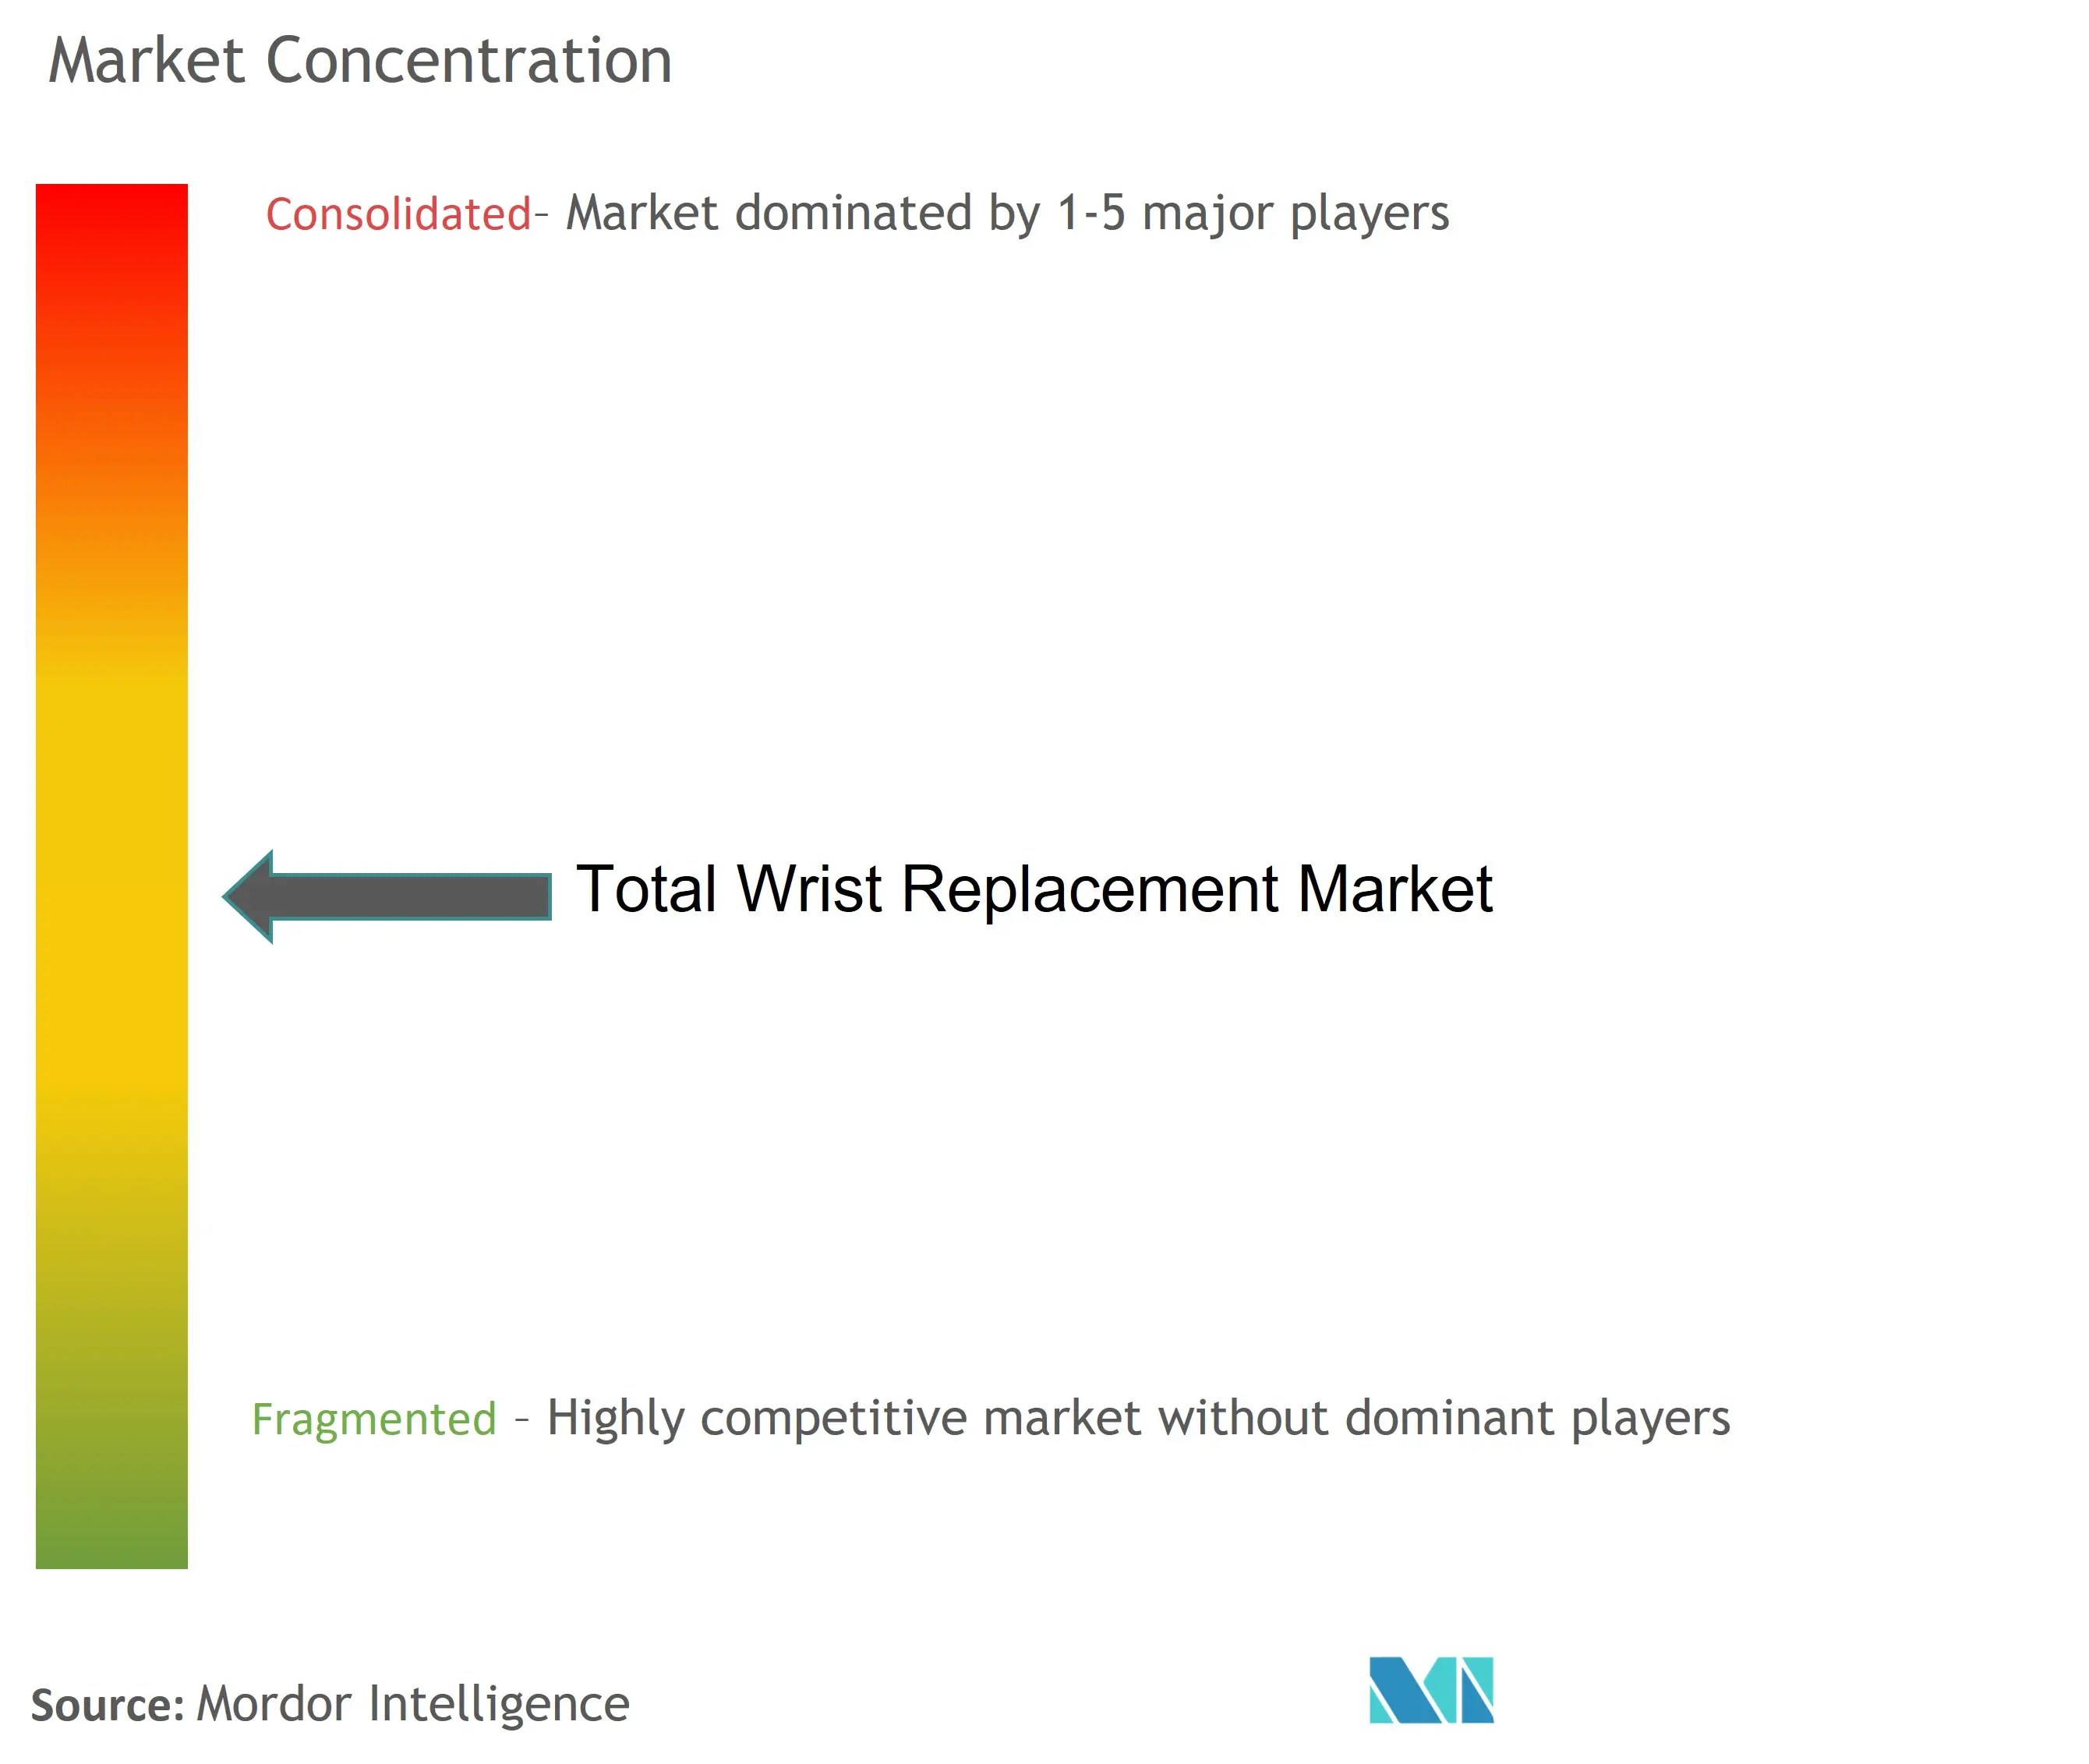 Total Wrist Replacement Market Concentration